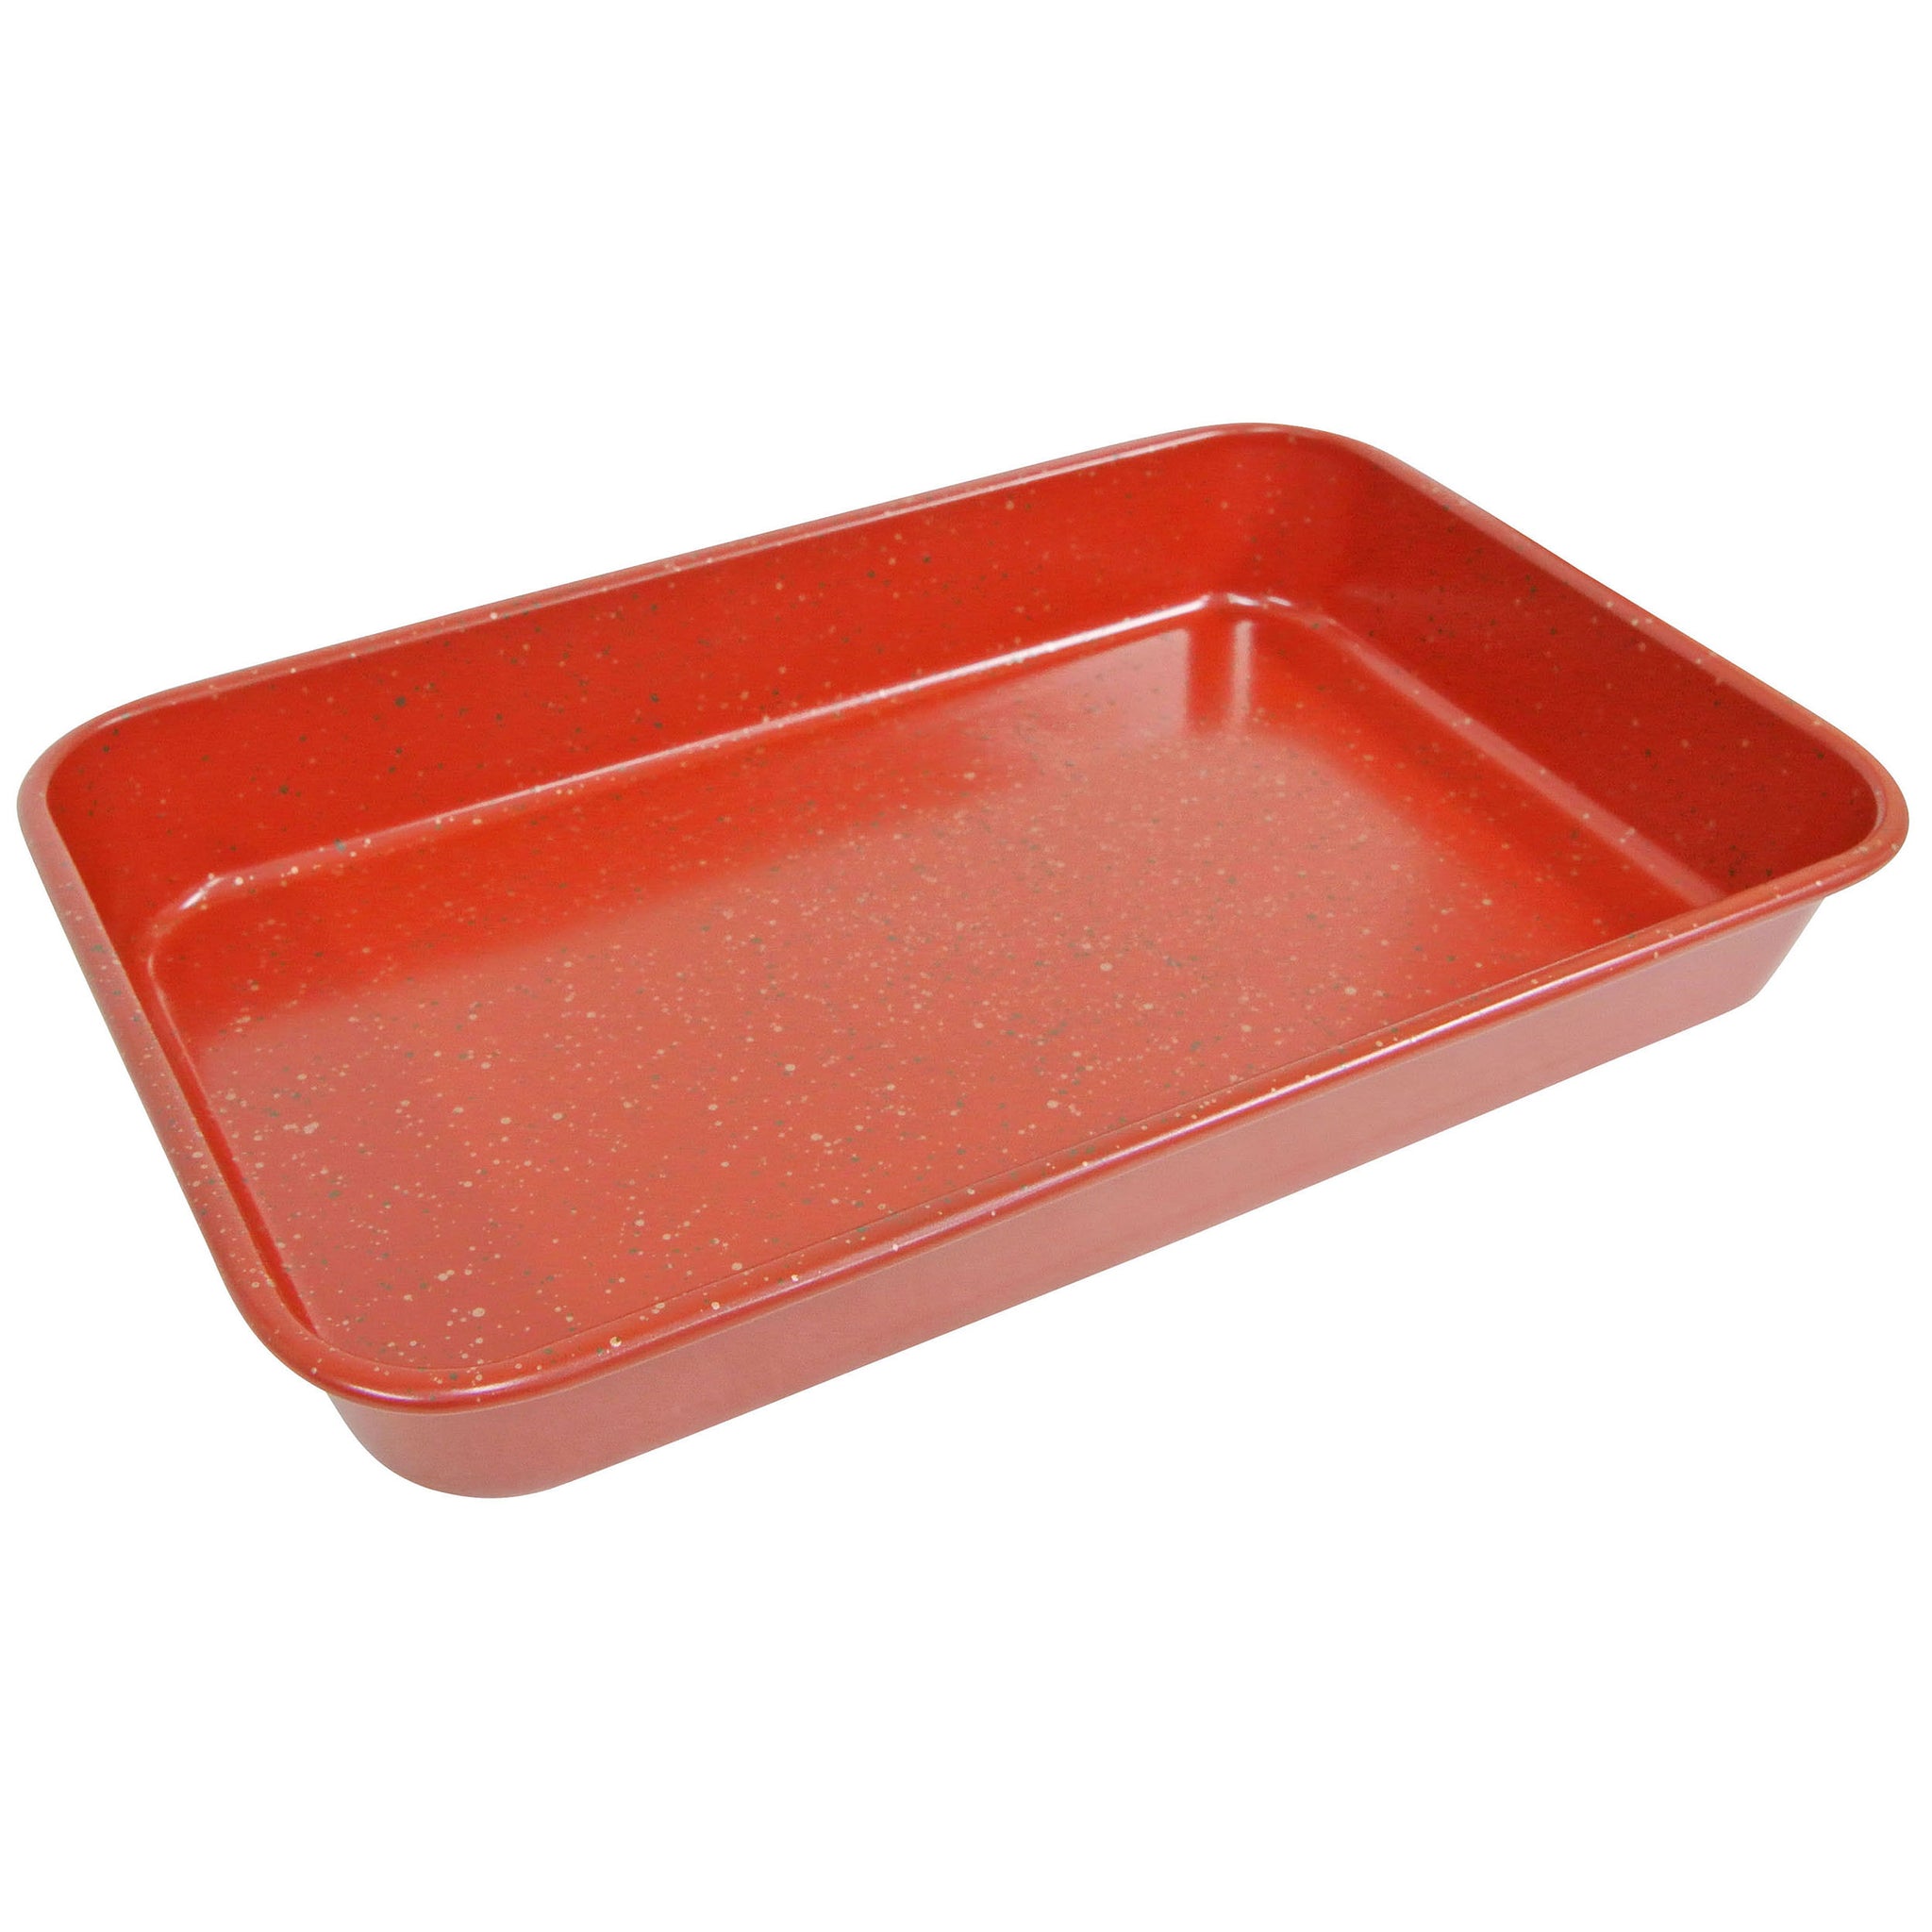 NEW COOK'S ESSENTIALS RED NONSTICK GLASS BAKING PAN 15-1/2 x 9-1